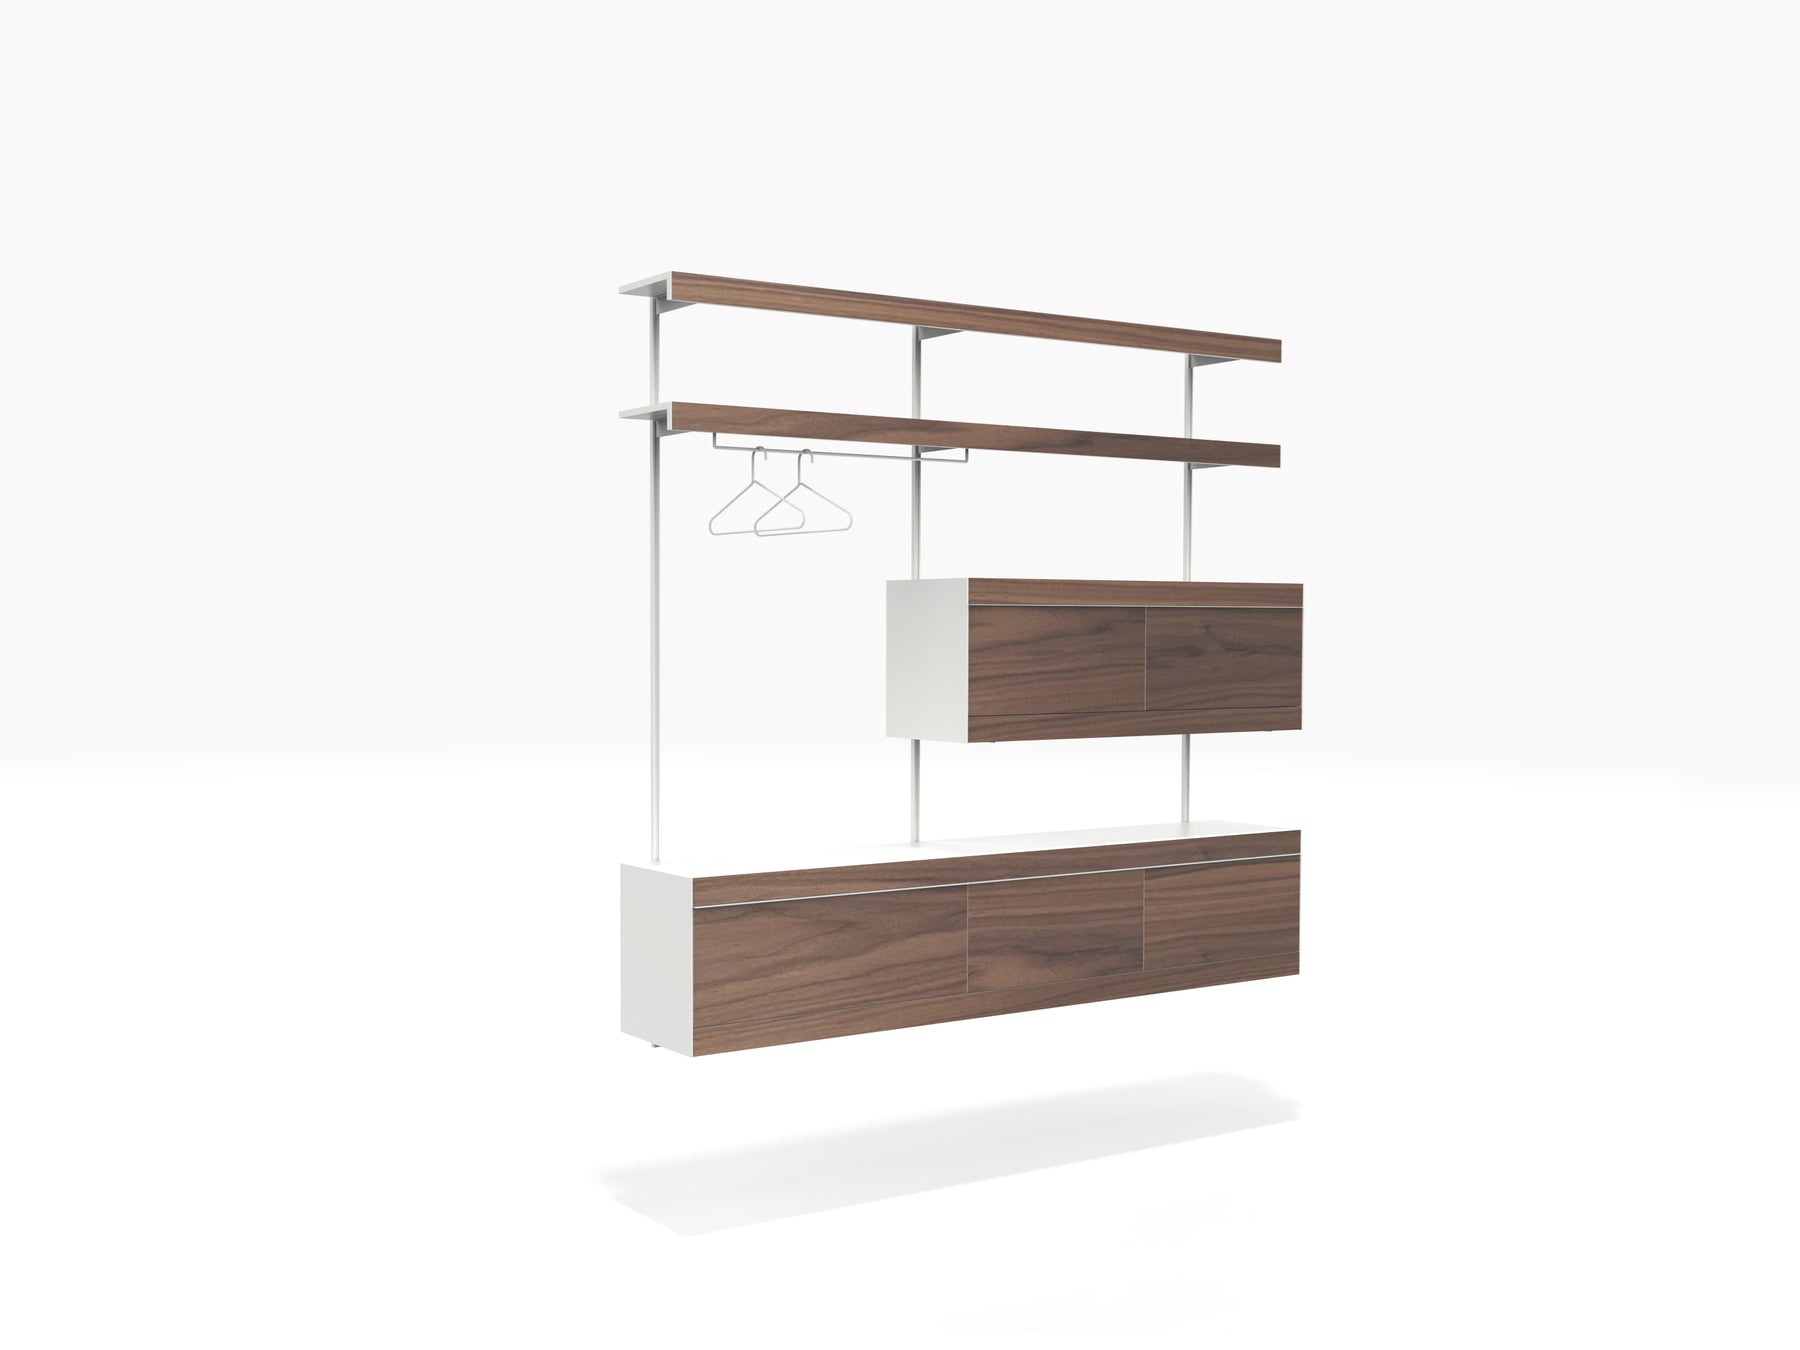 Wall mounted modular shelving system with cabinets and clothes hanger